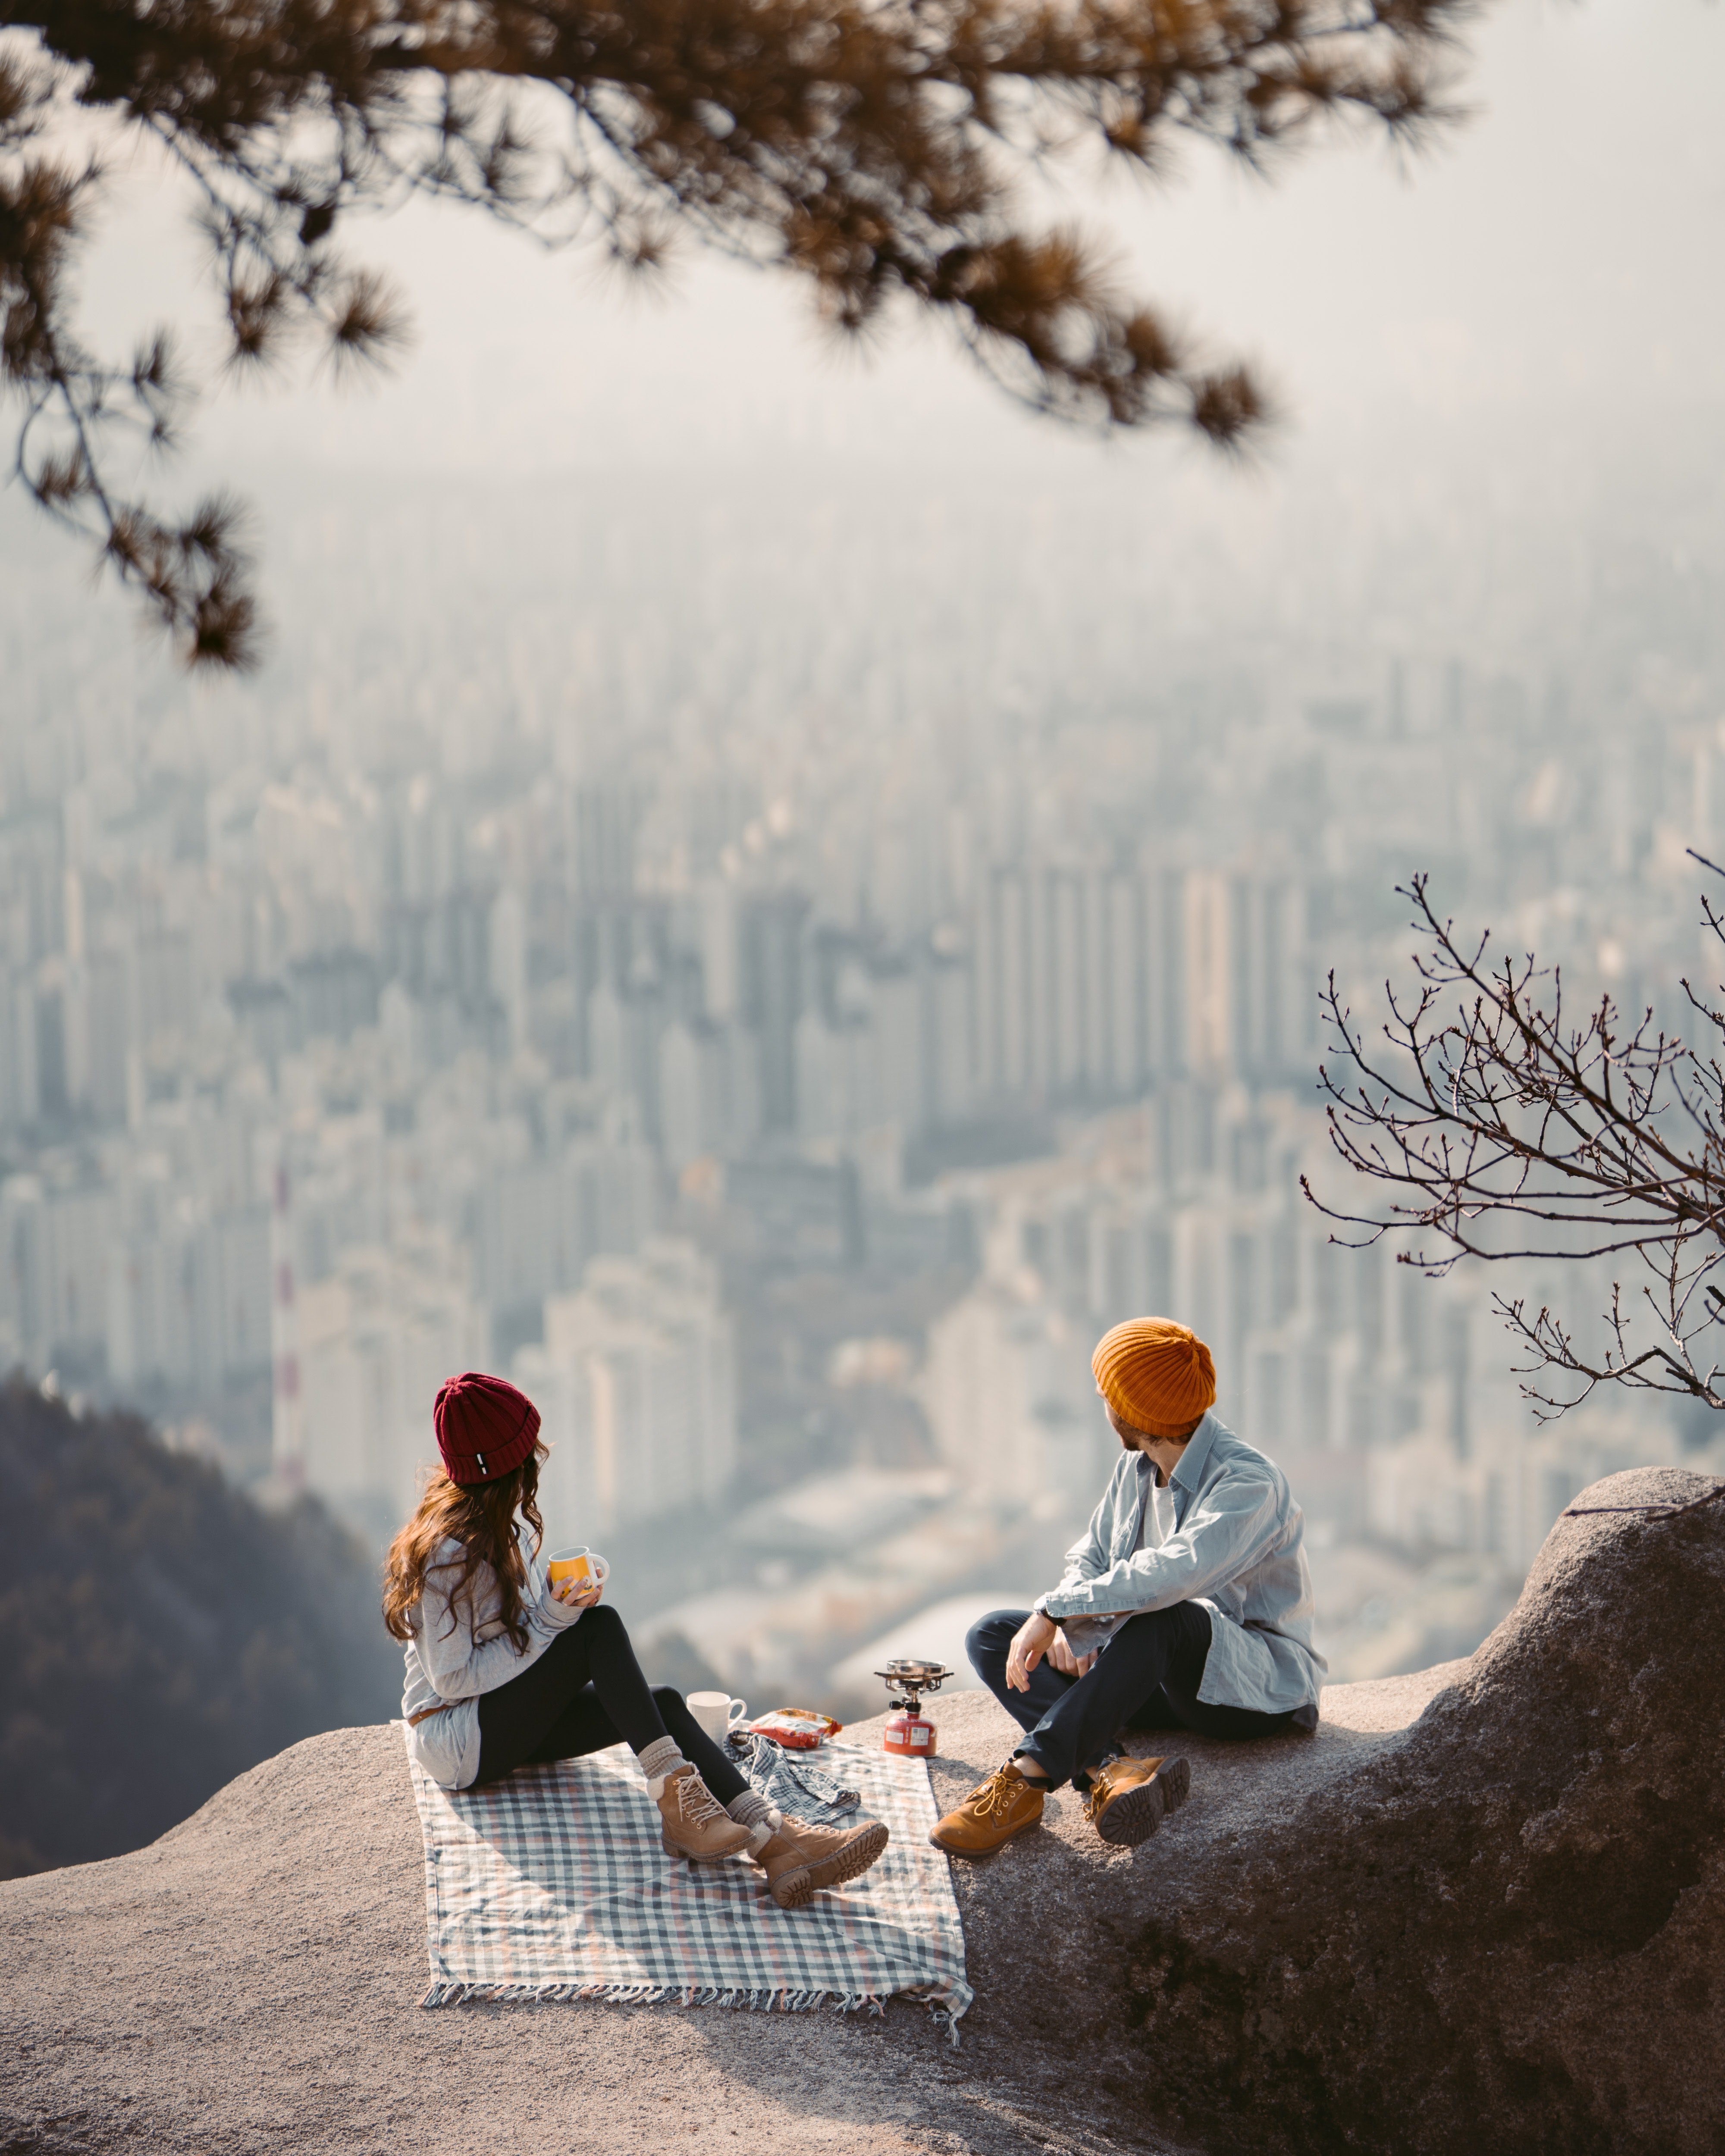 A couple having a picnic on a cliff. | Source: Pexels